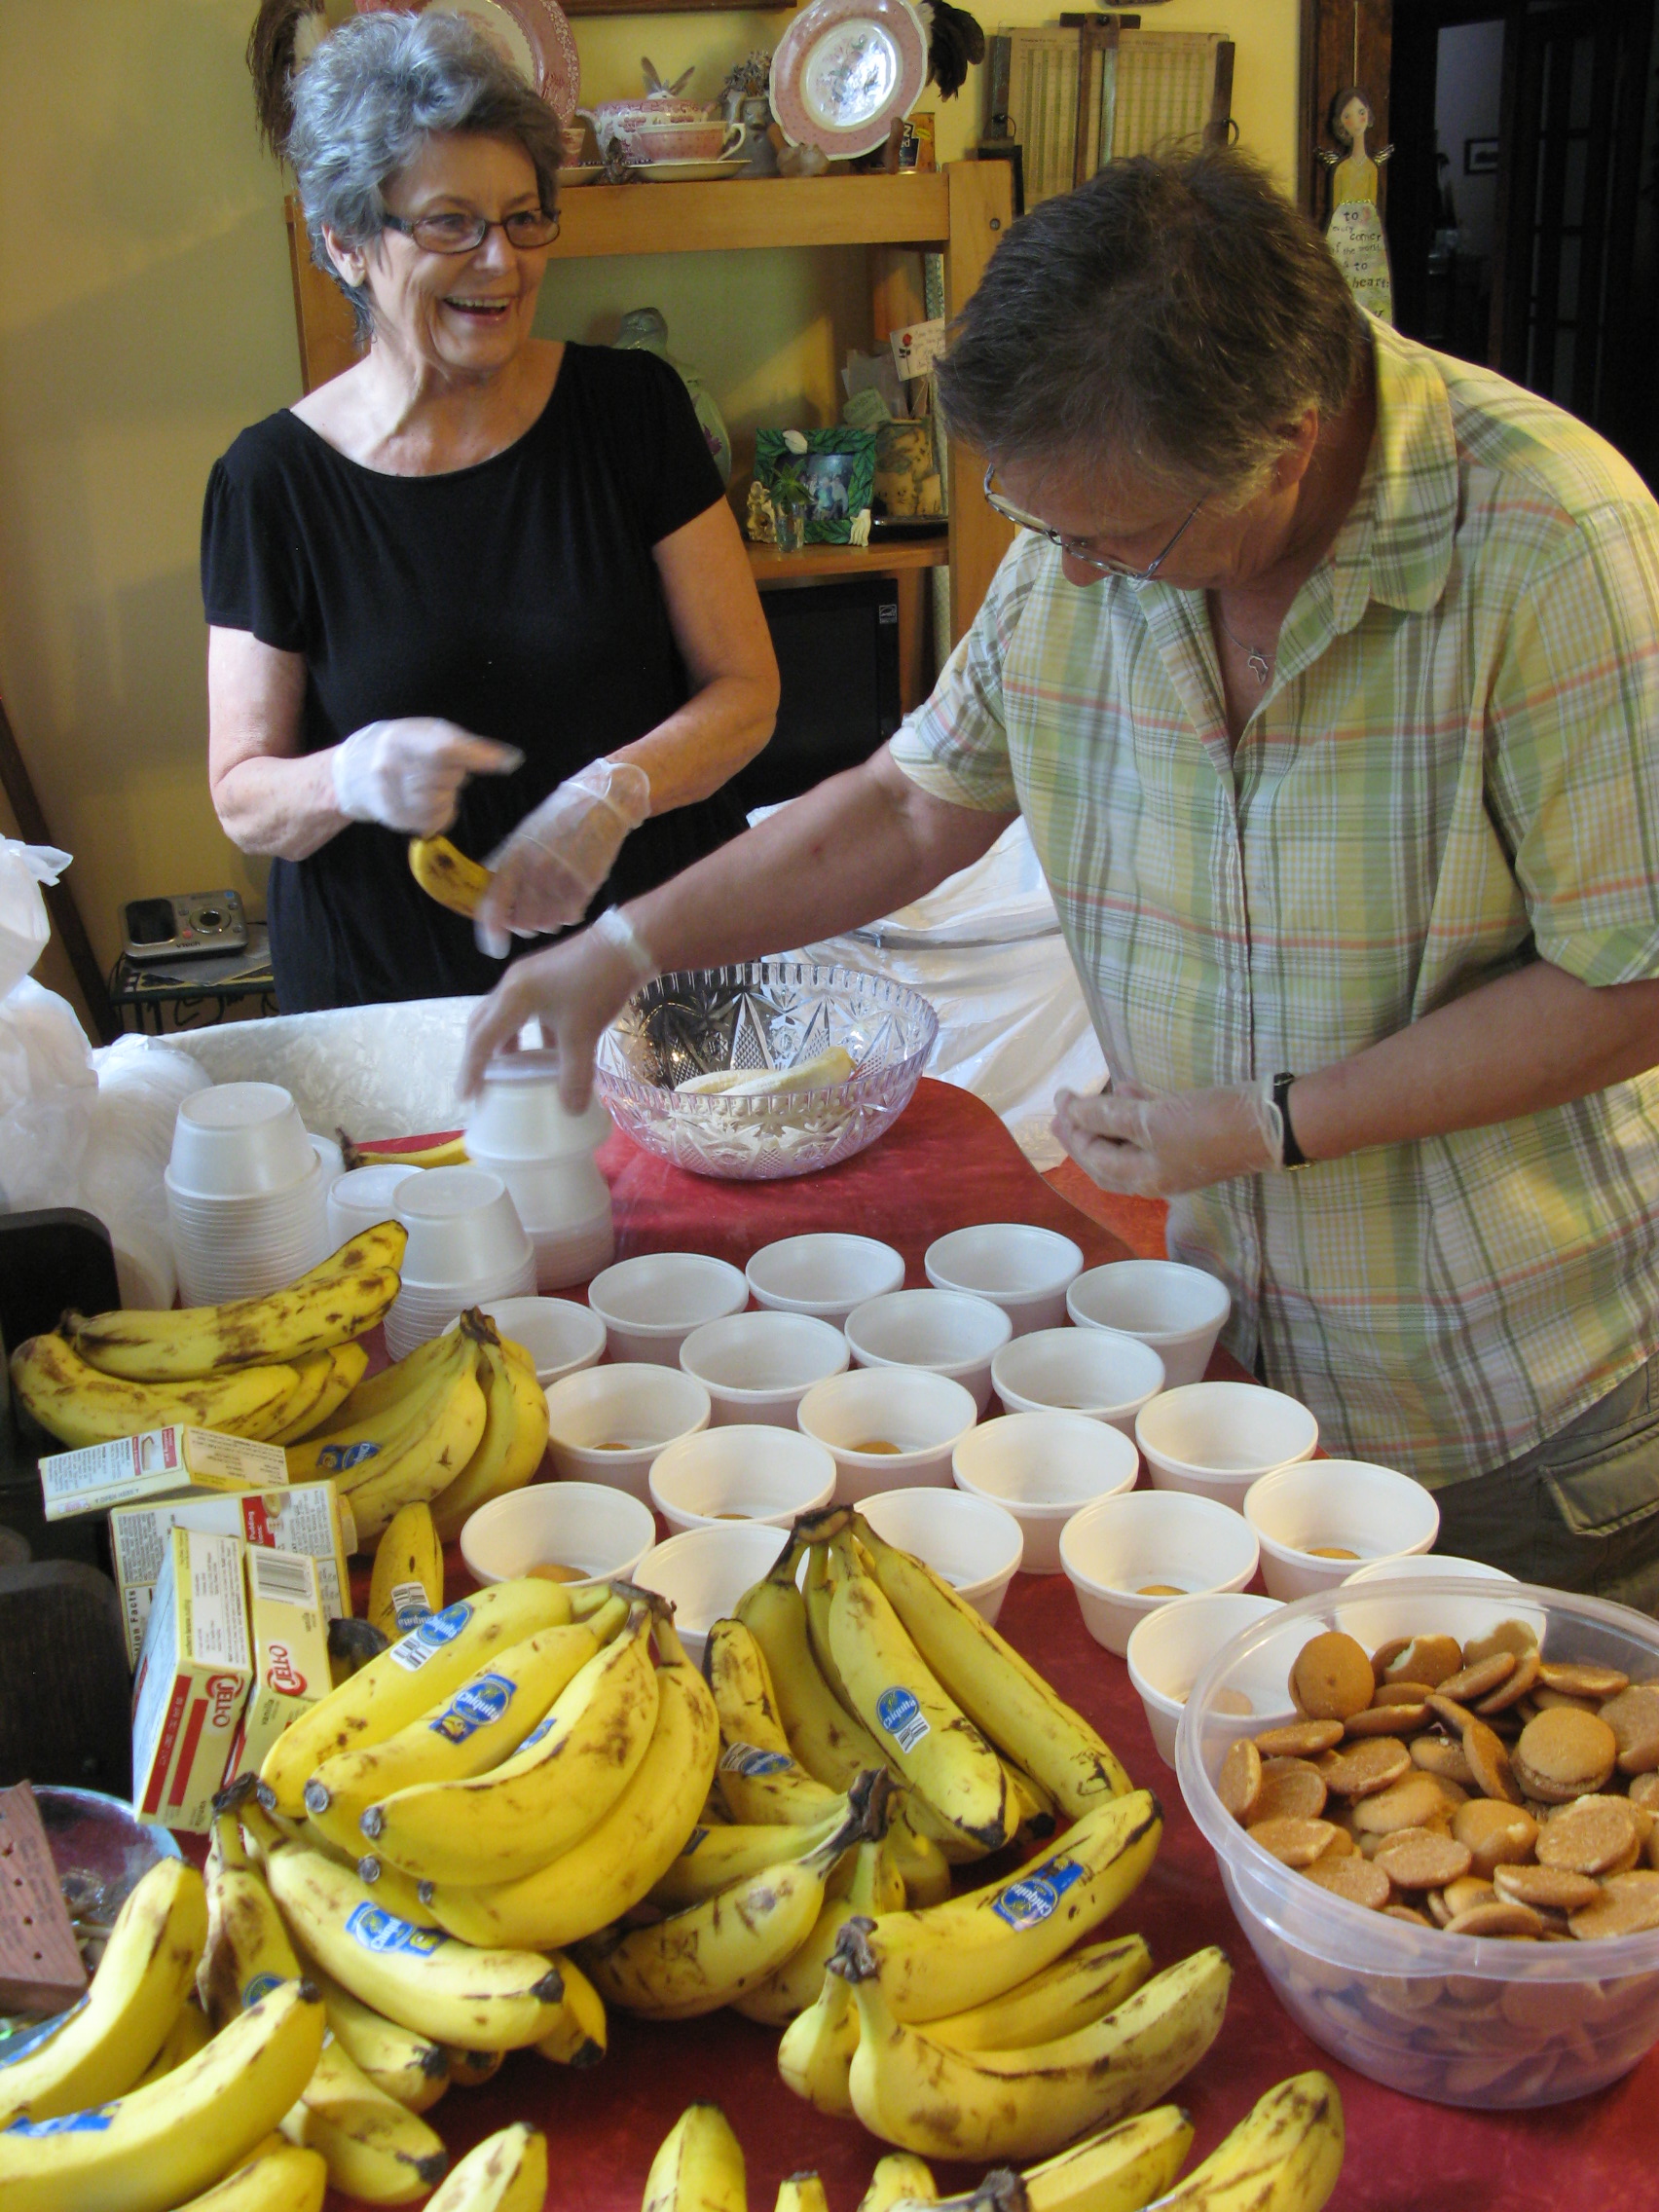 Pat Franklin (left) and Judy Ricker (right) packing cups of banana pudding. Pat used to work in social services for Madison County, and for almost ten years, she managed Elaine’s, a nightclub at the Grove Park Inn. Now she coordinates entertainment at the Depot in downtown Marshall. Judy’s family is from over in Shelton Laurel, and she is a quilter who also writes about people and events in Madison County, the way downtown Marshall used to be, etc. Friday, June 12, 2015. Leanne E. Smith. 